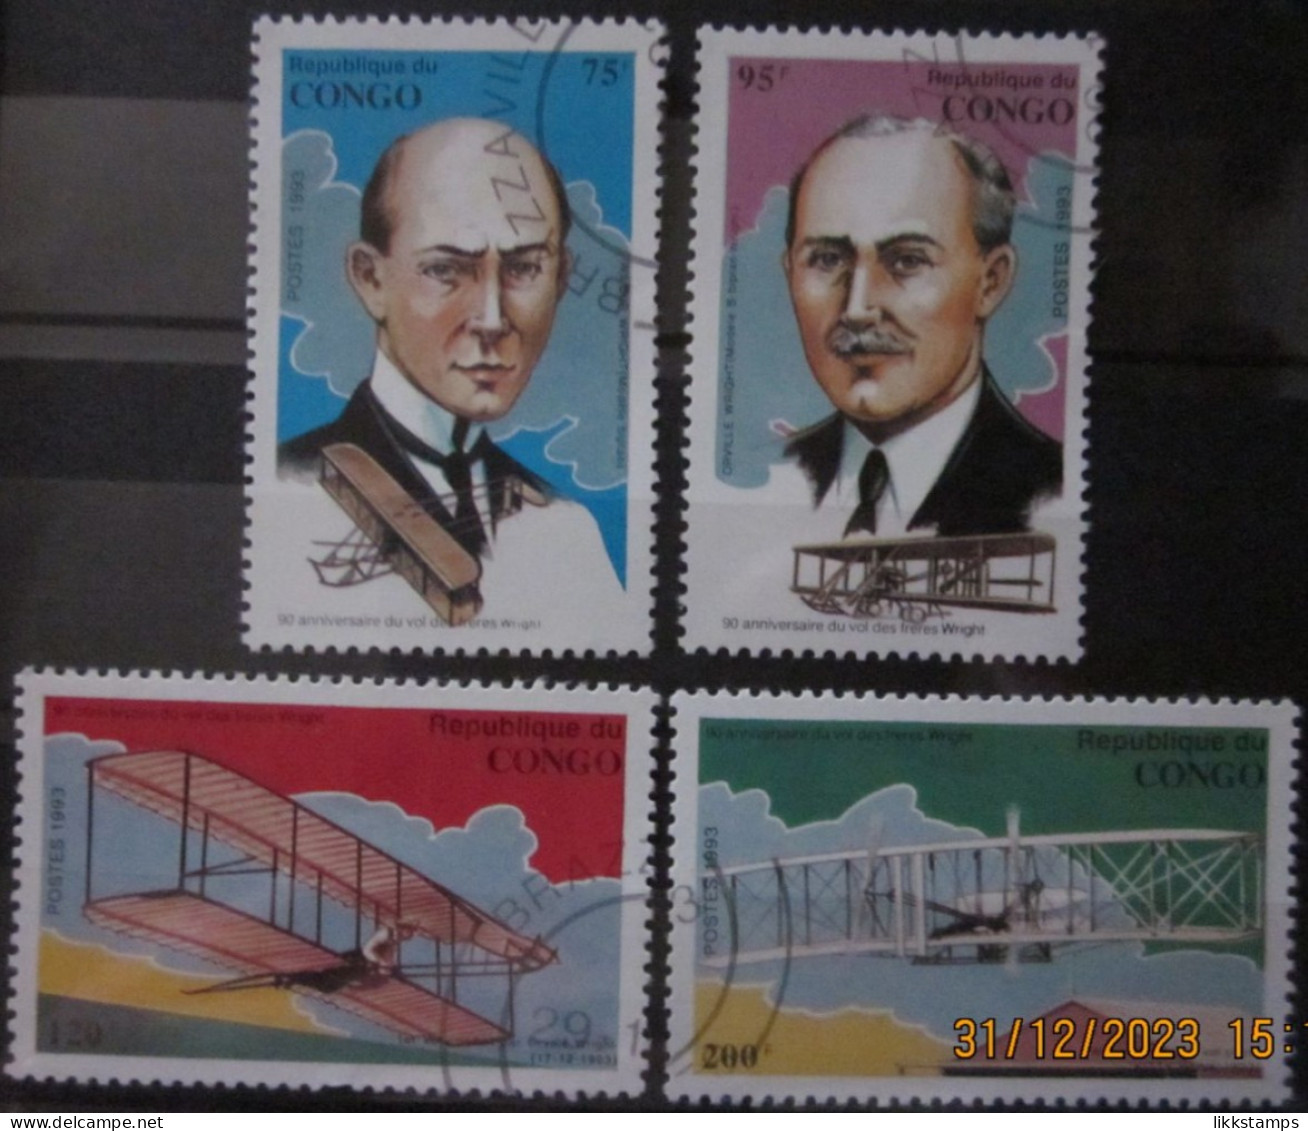 CONGO 17/12/1993 ~ THE 90th ANNIVERSARY OF THE FIRST POWERED FLIGHT. ~  VFU #03087 - Afgestempeld